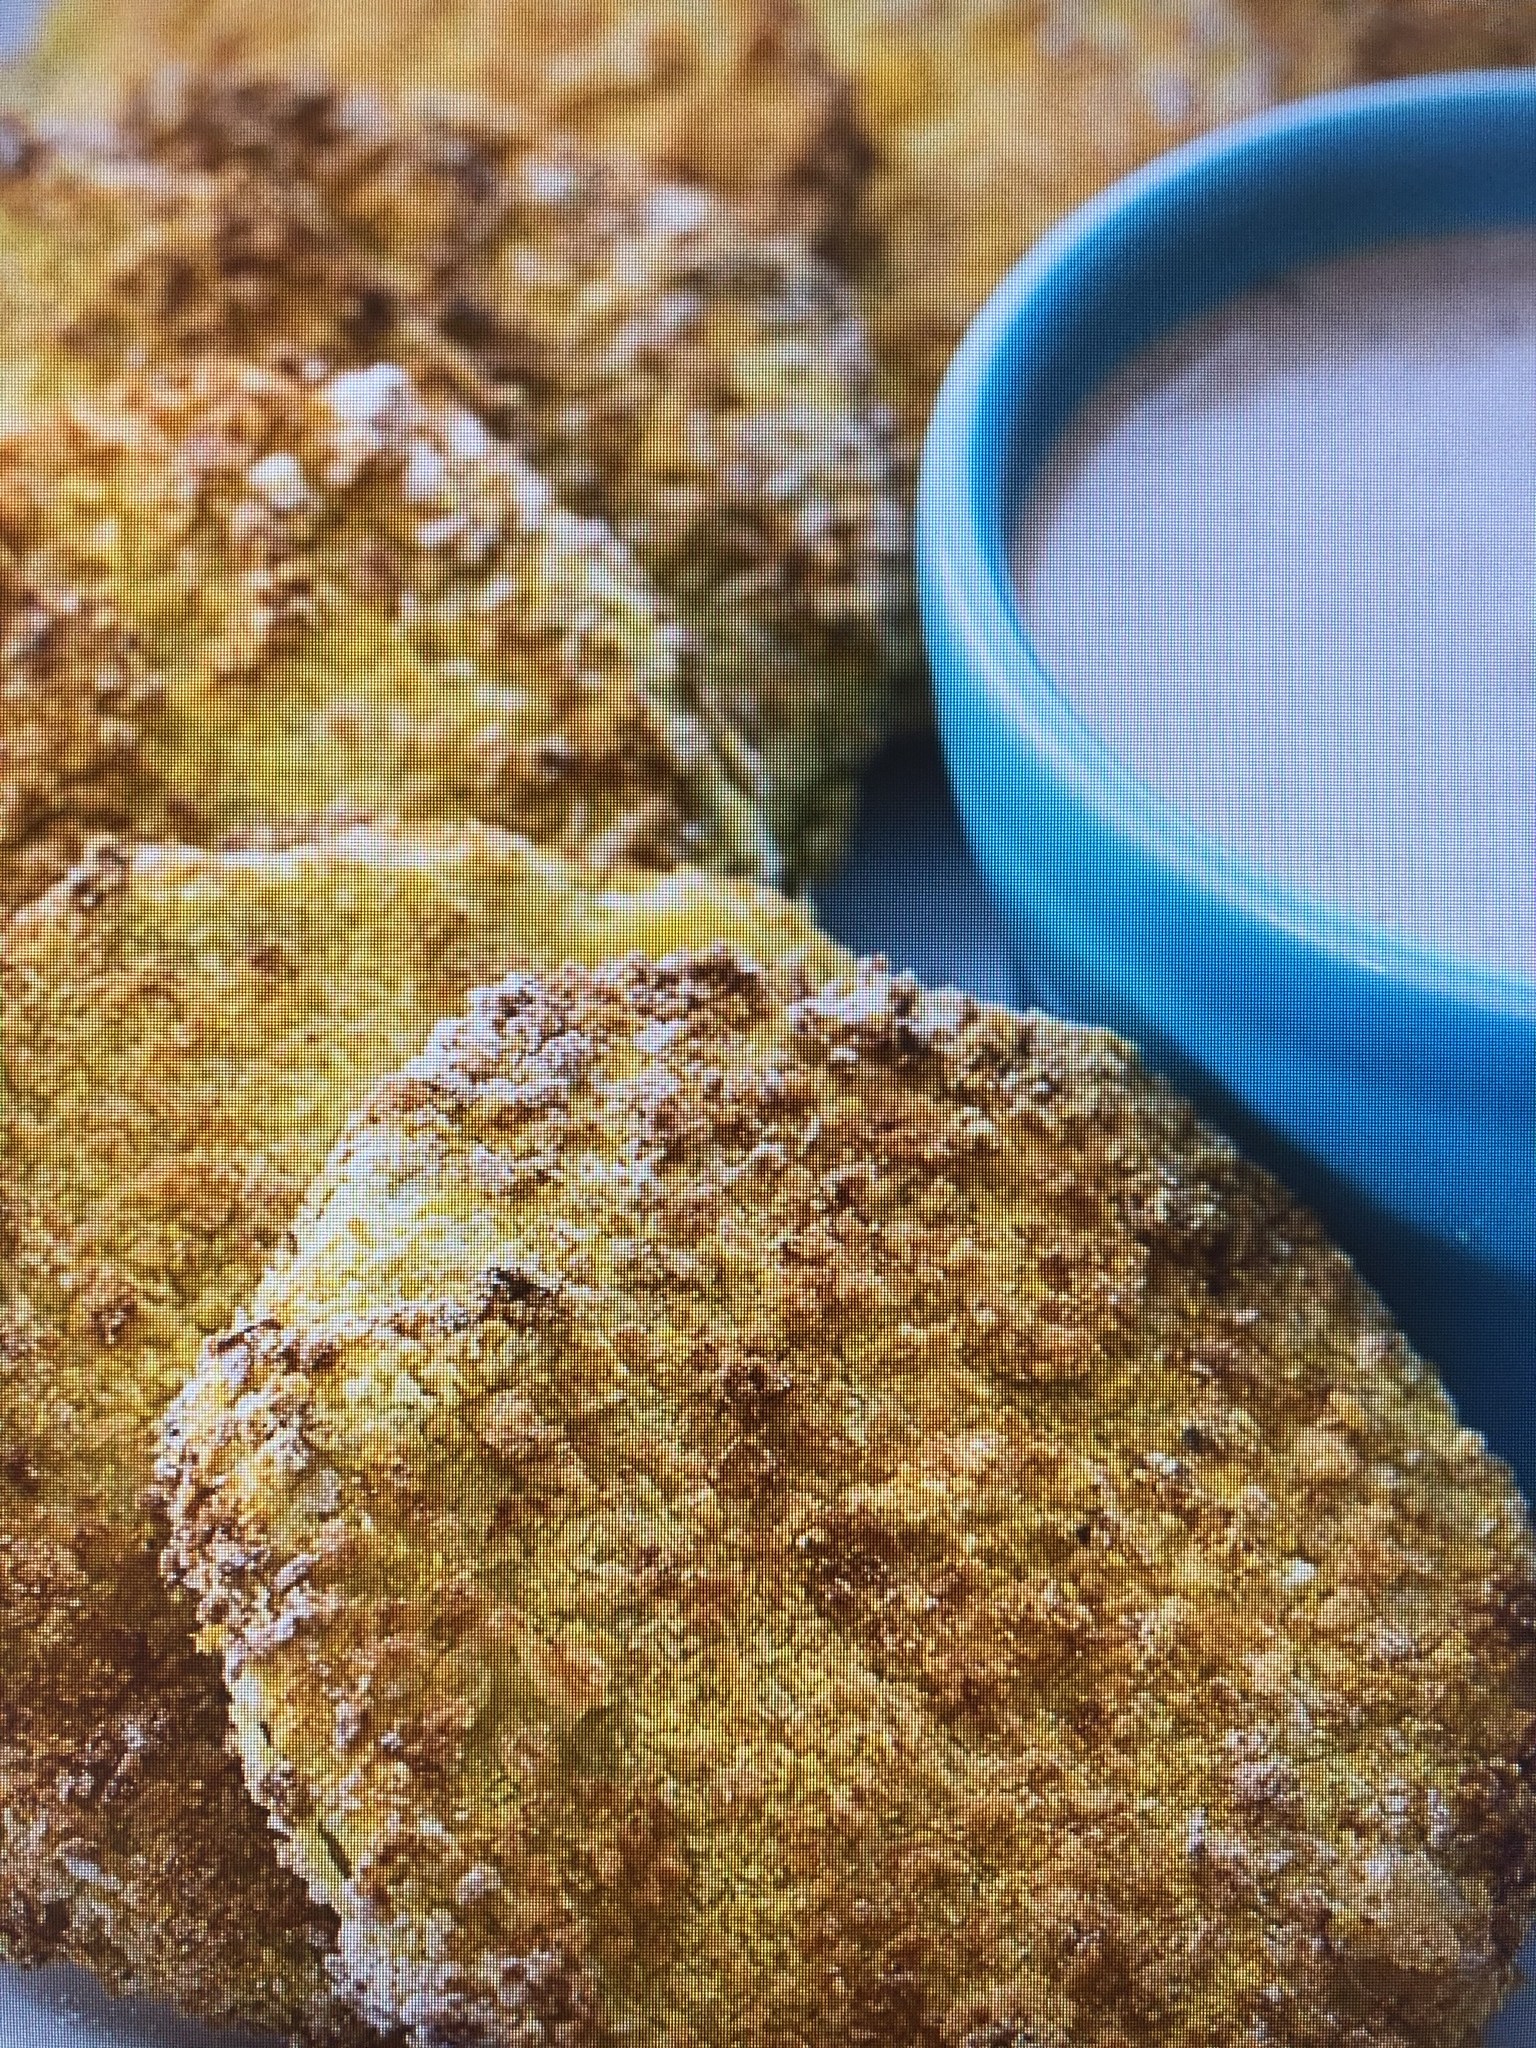 Healthy Air-Fried Green Tomatoes